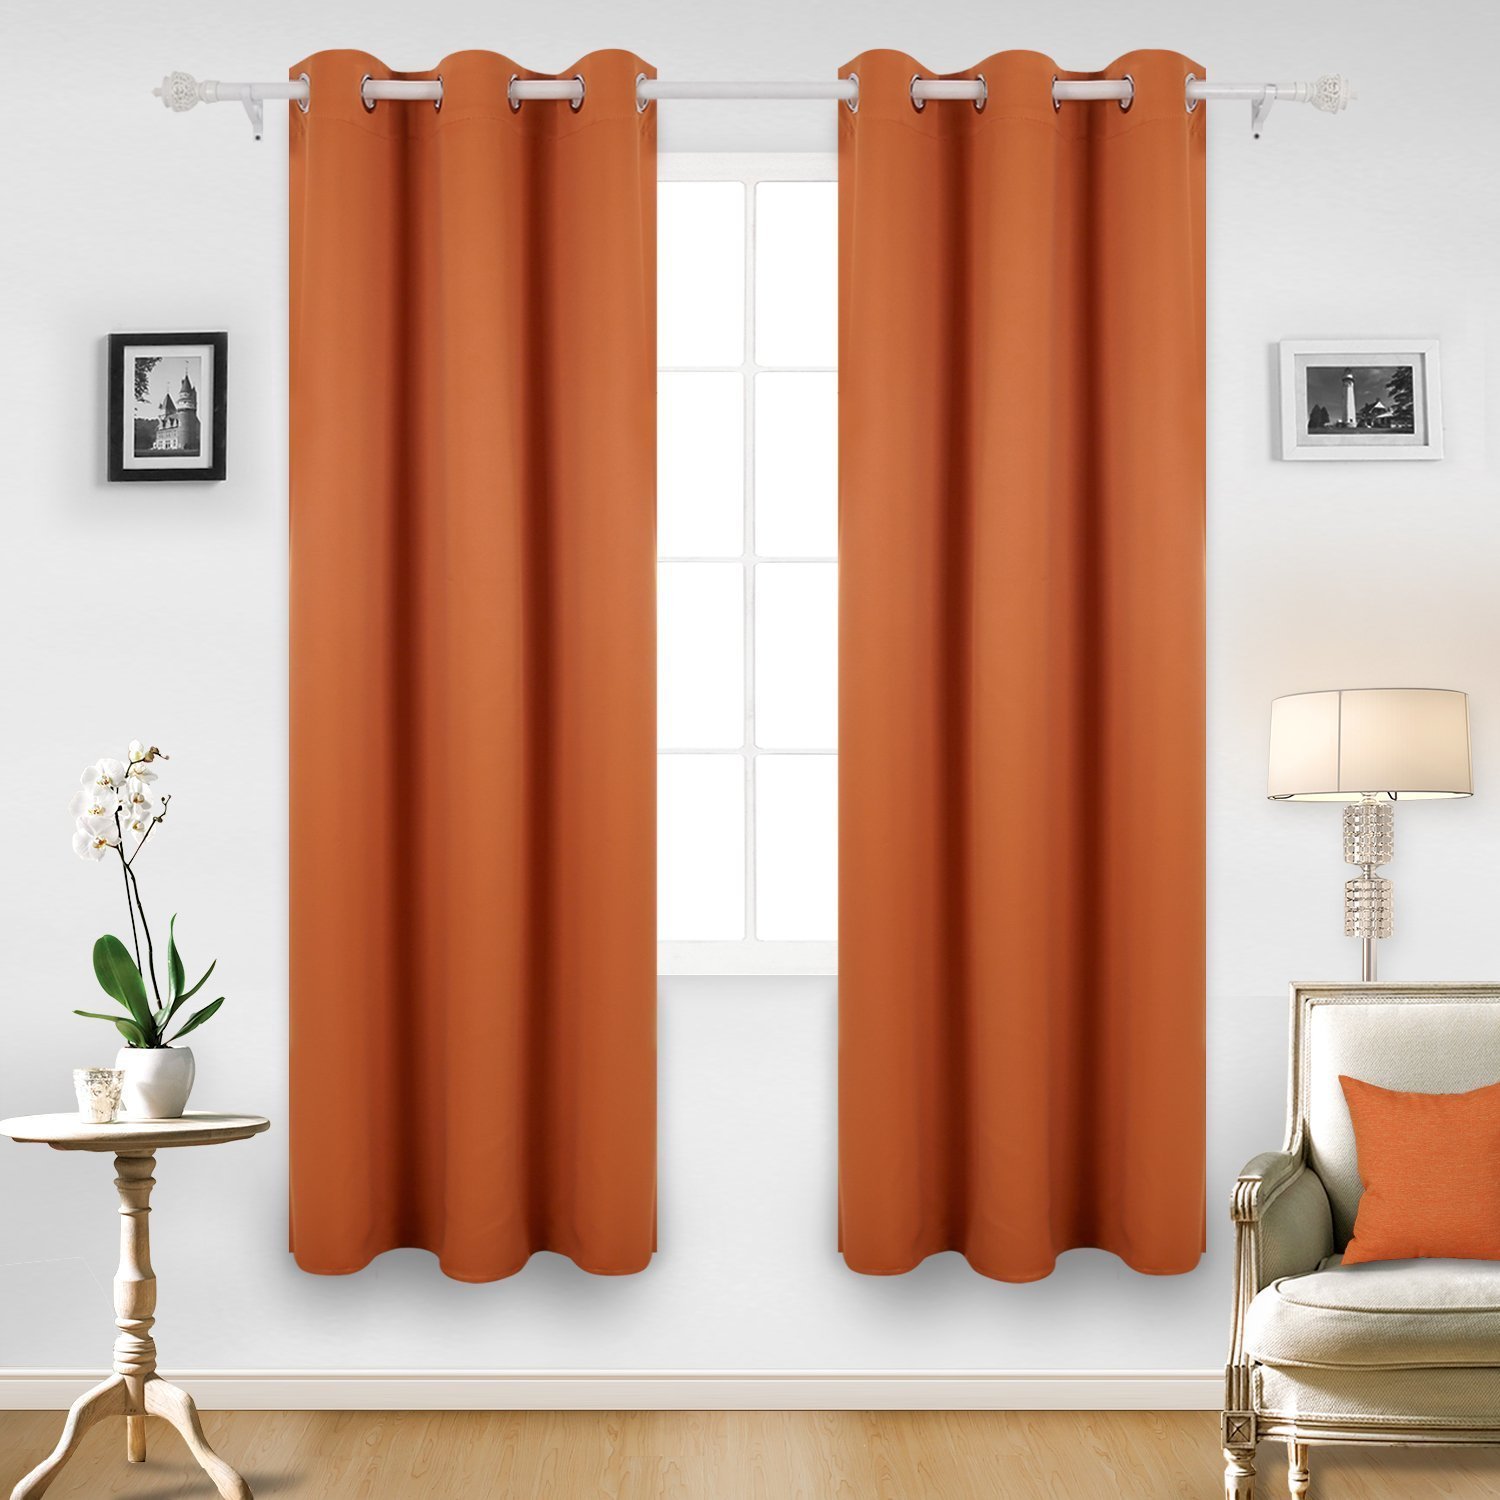 Umi Foil Printed Line Room Darkening Curtains Thermal Insulated Window Eyelet Curtains Bedroom Curtains for Living Room 55 x 54 Inch Beige 2 Panels Brand 